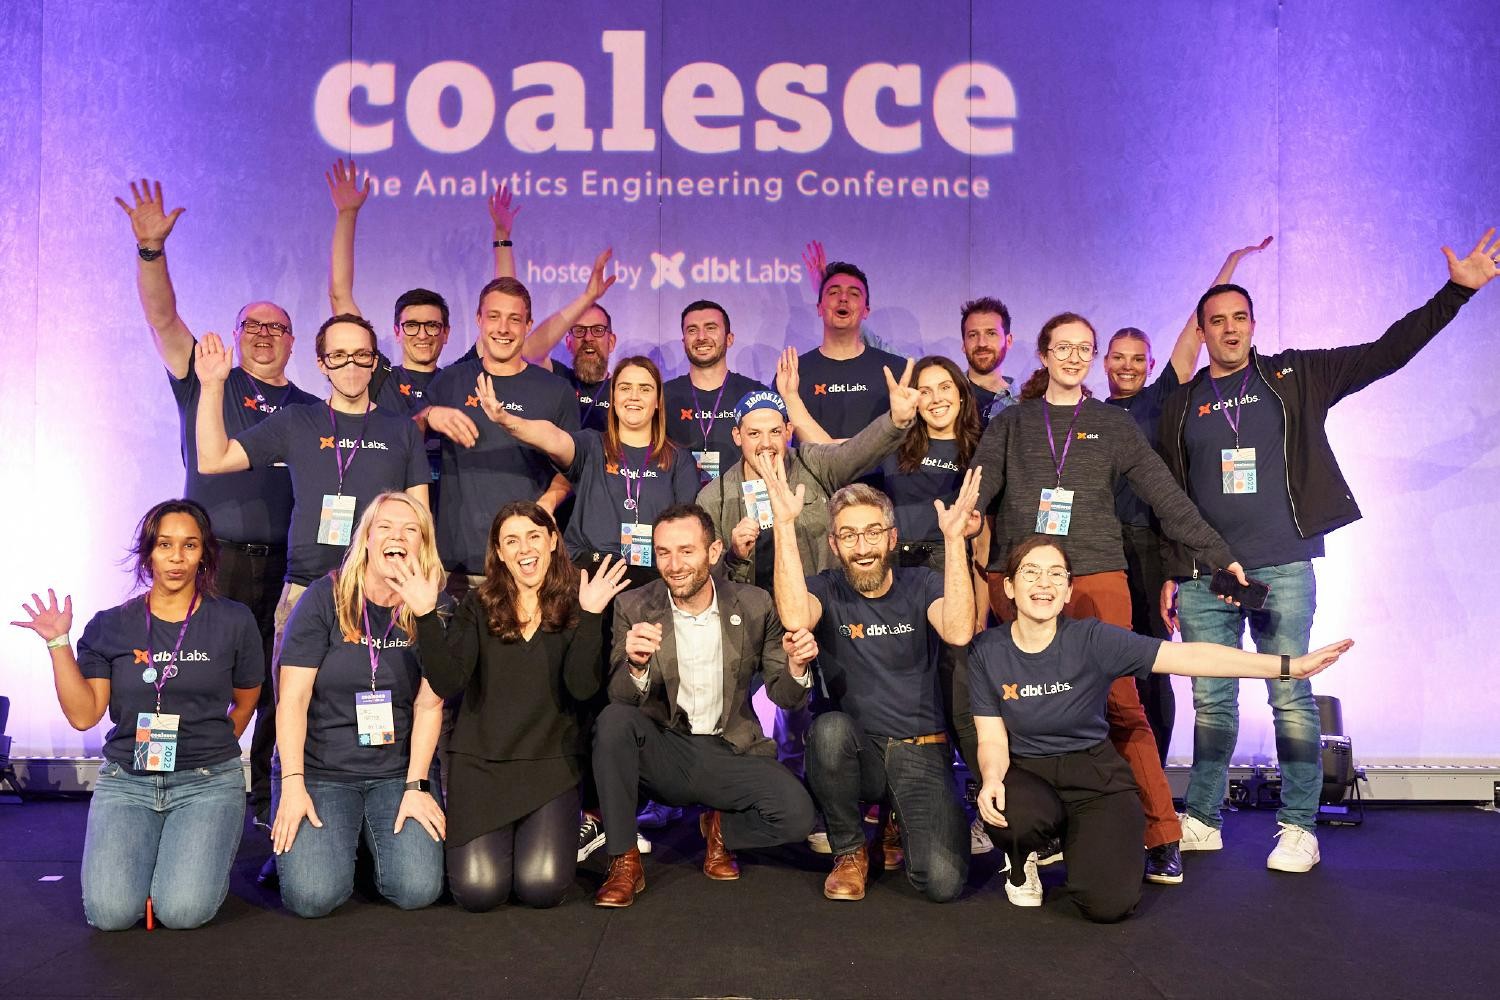 dbt Labs team at our annual Coalesce Conference - London 